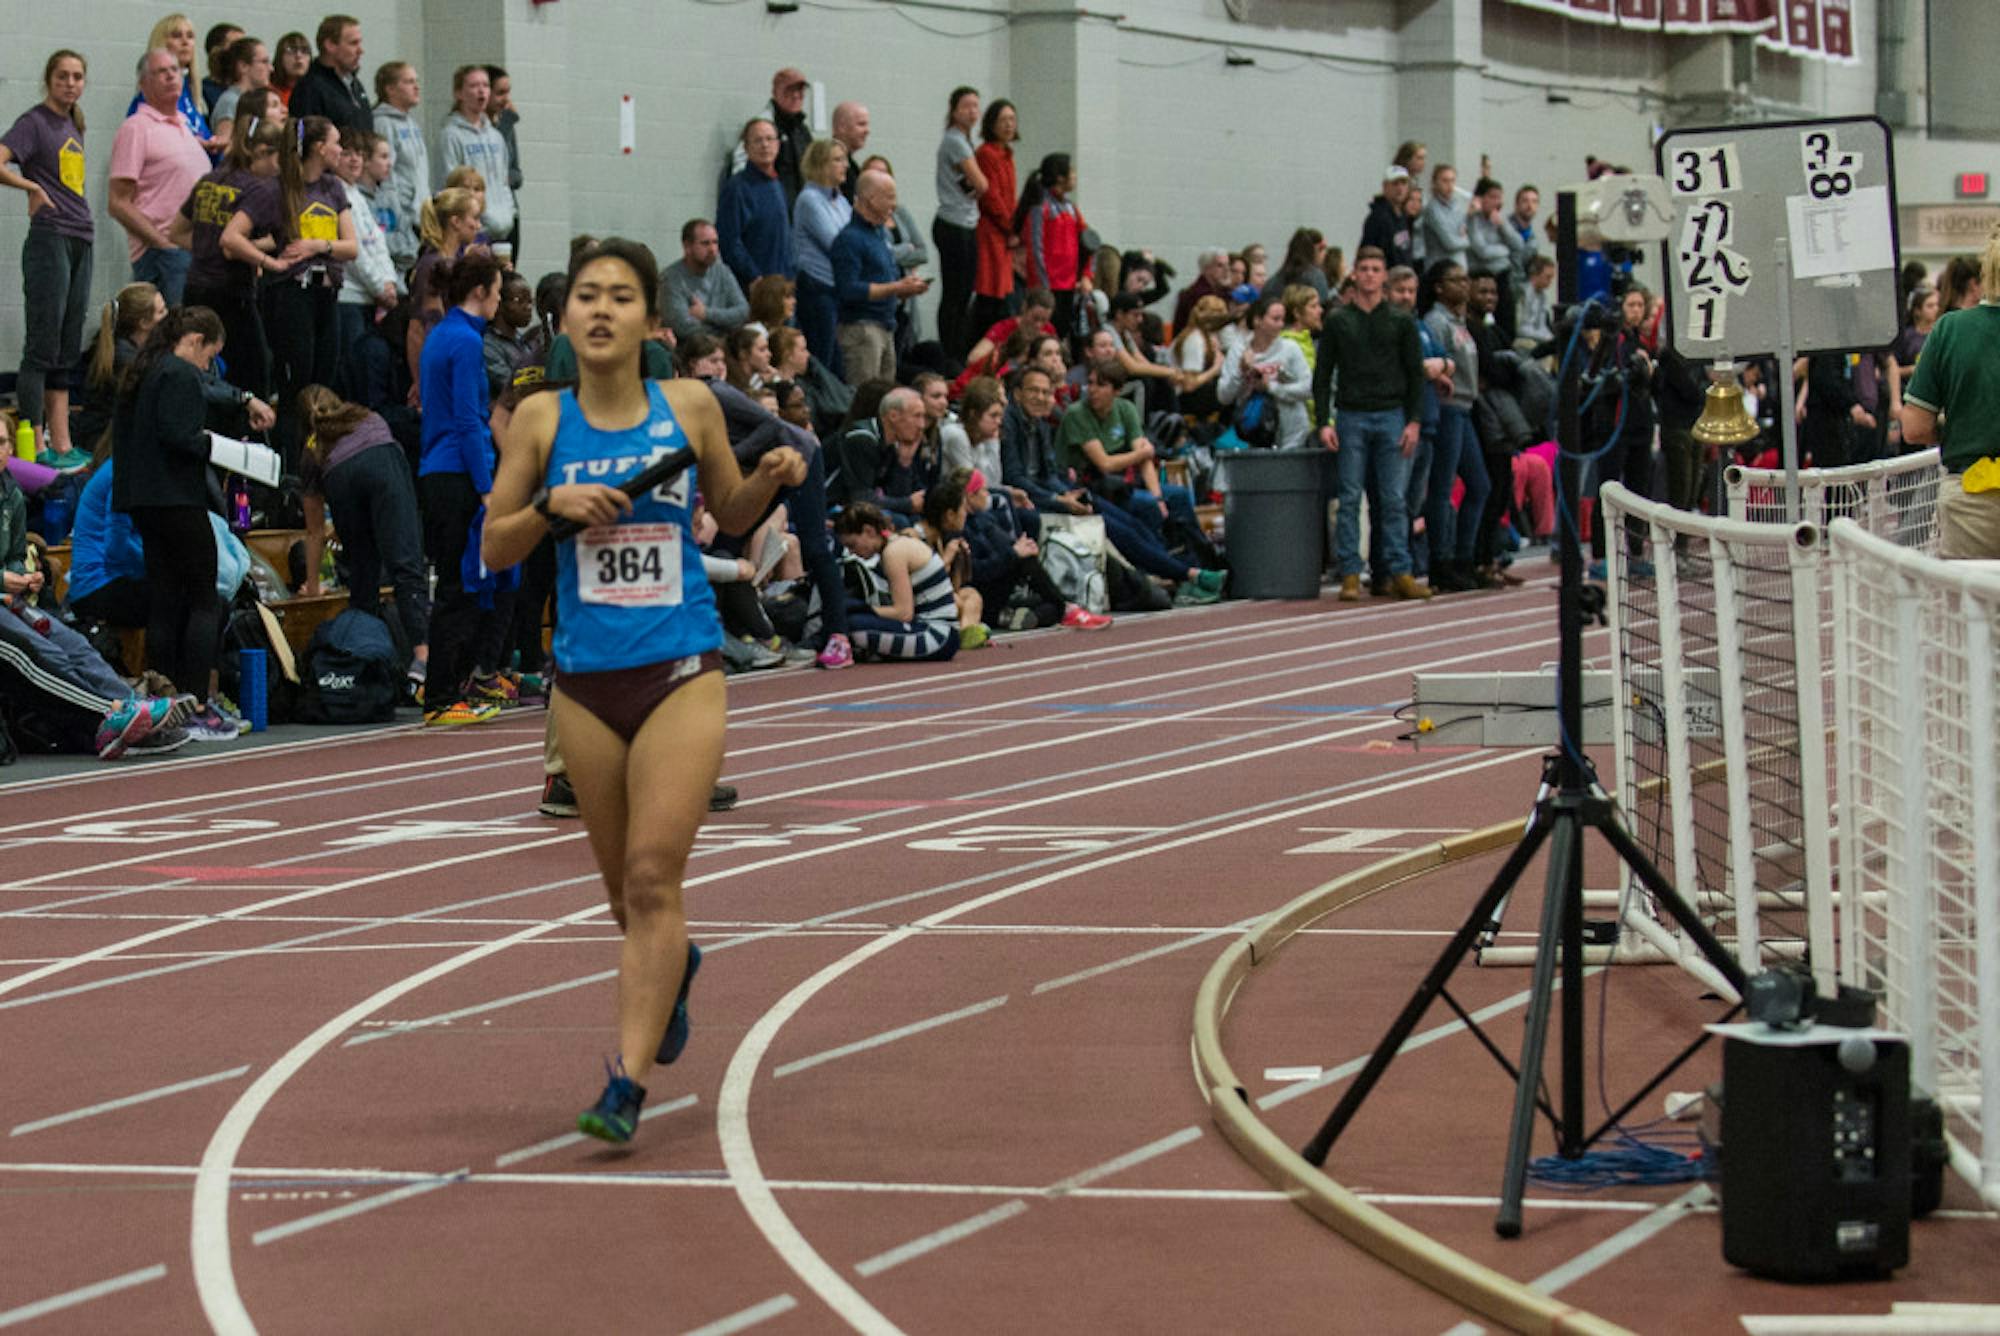 2017-02-18-Womens-Track-and-Field-at-MIT-032